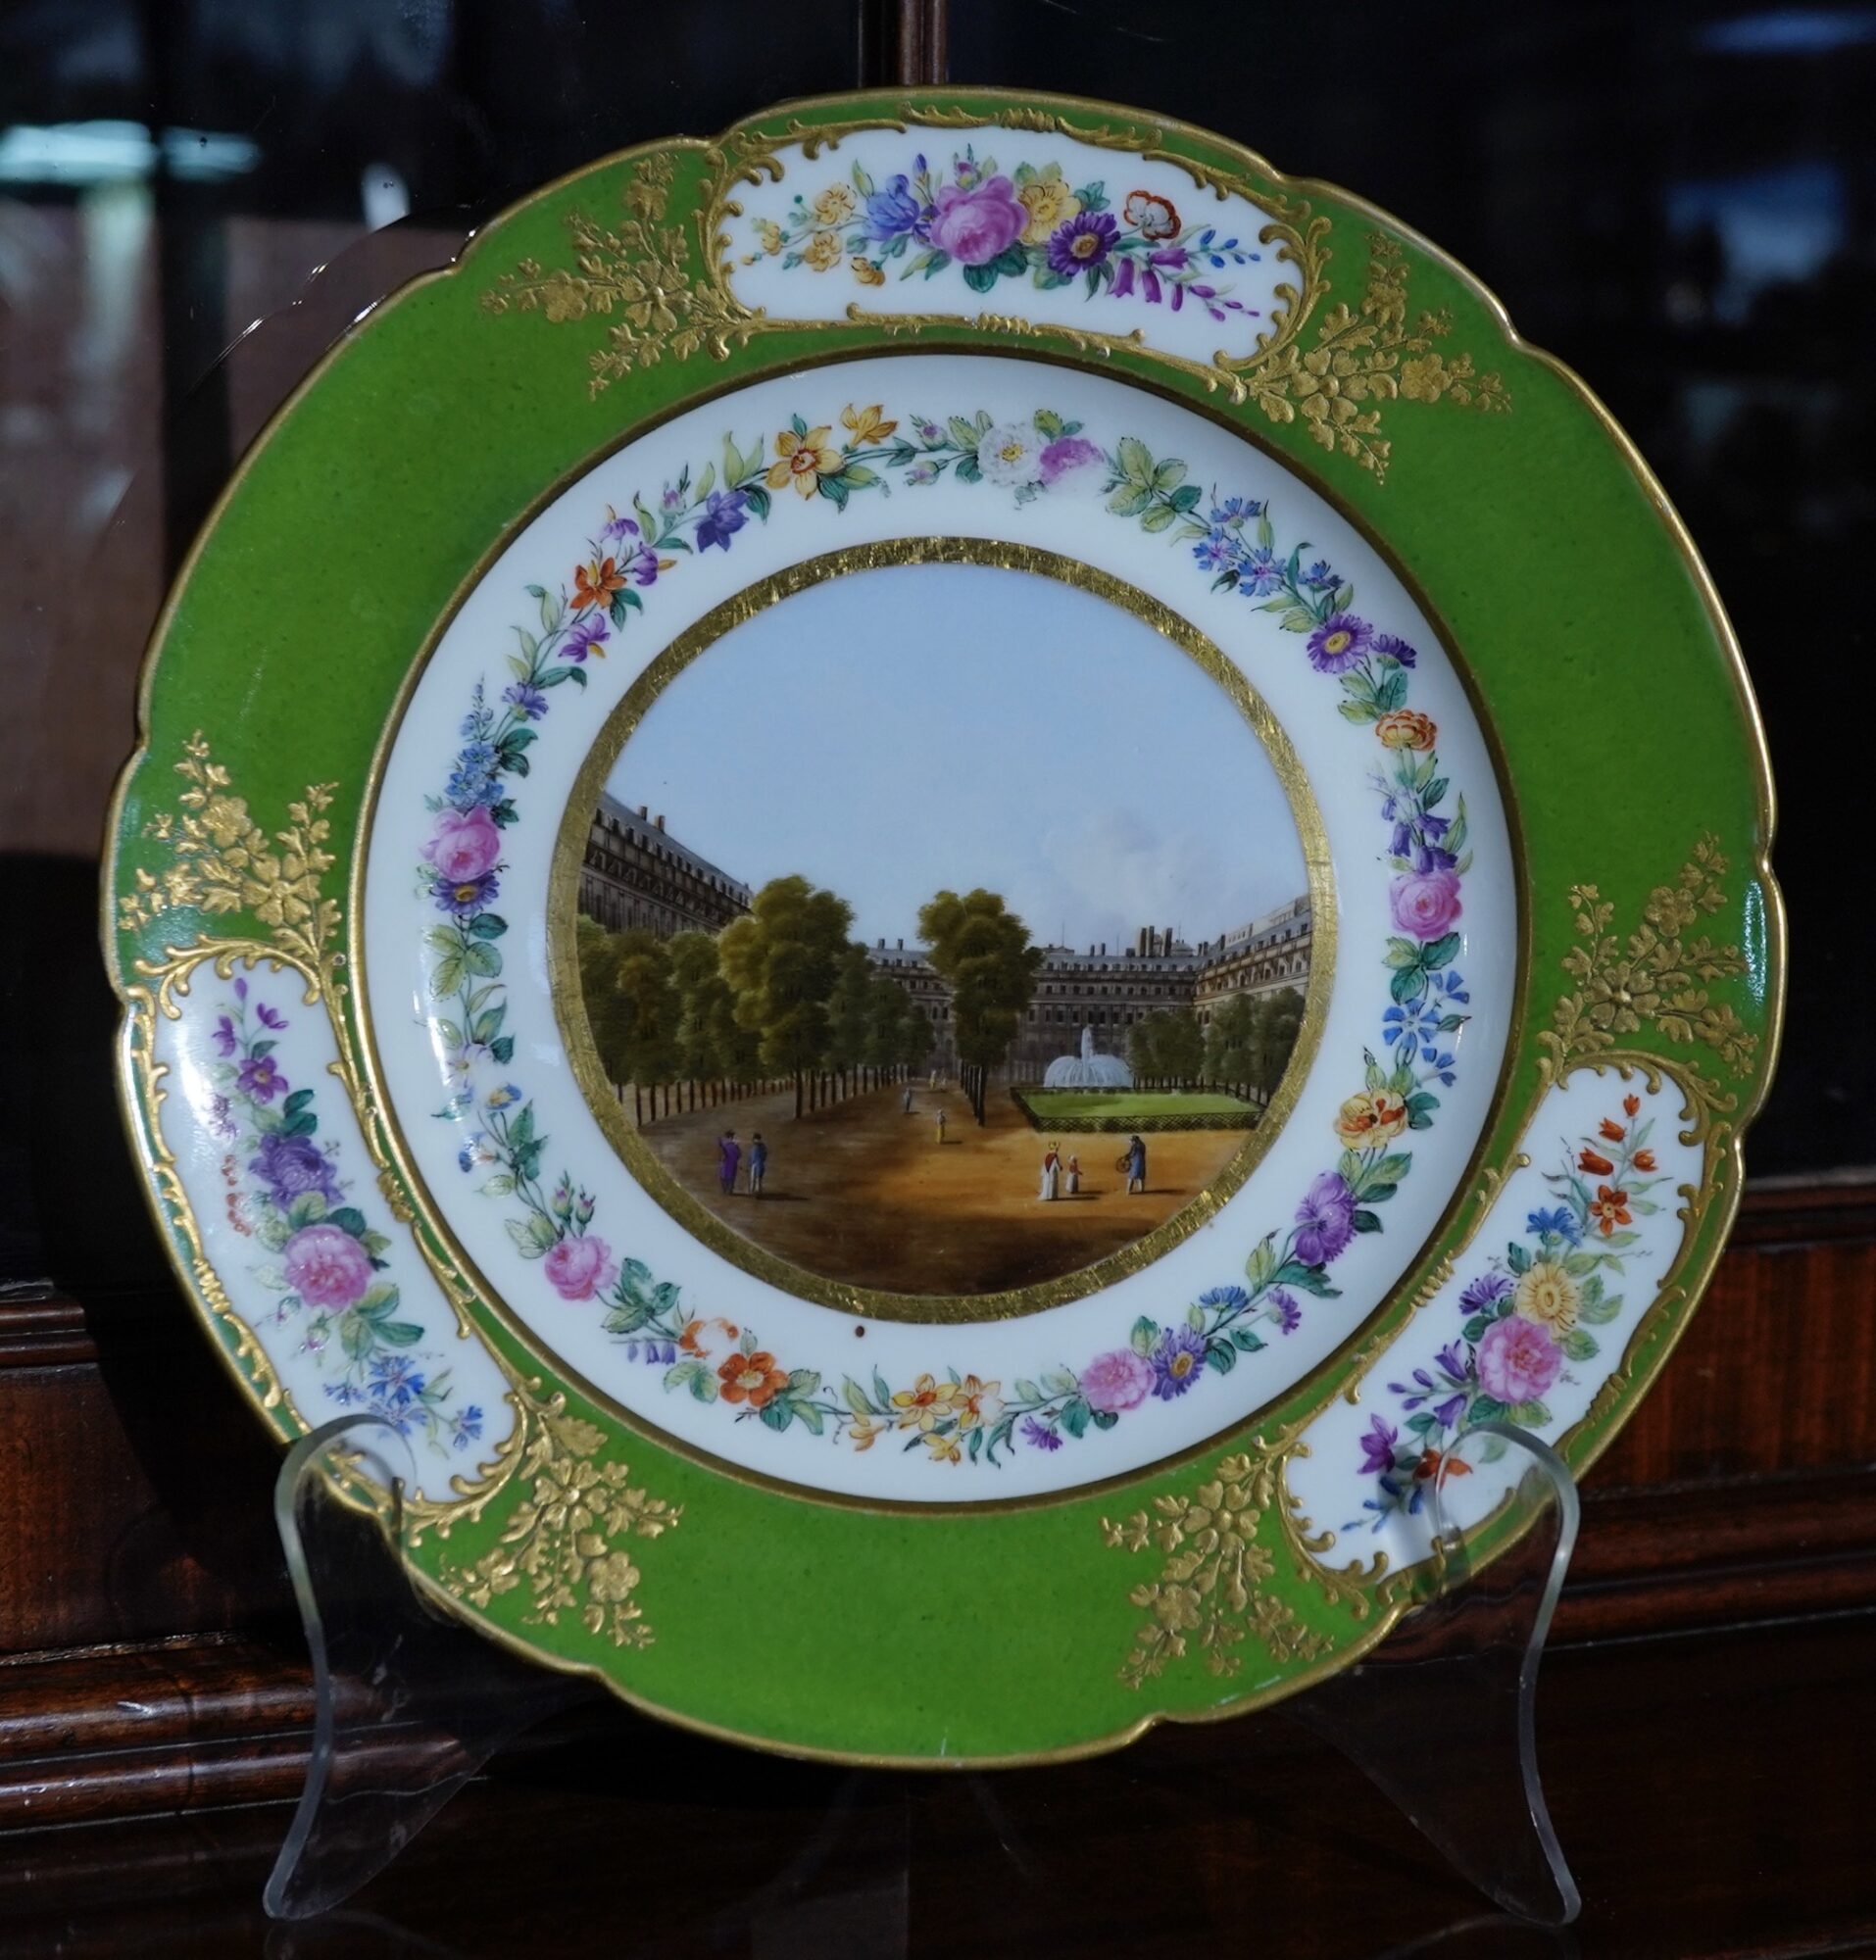 Palais Royal, on a plate by Feuillet c.1830